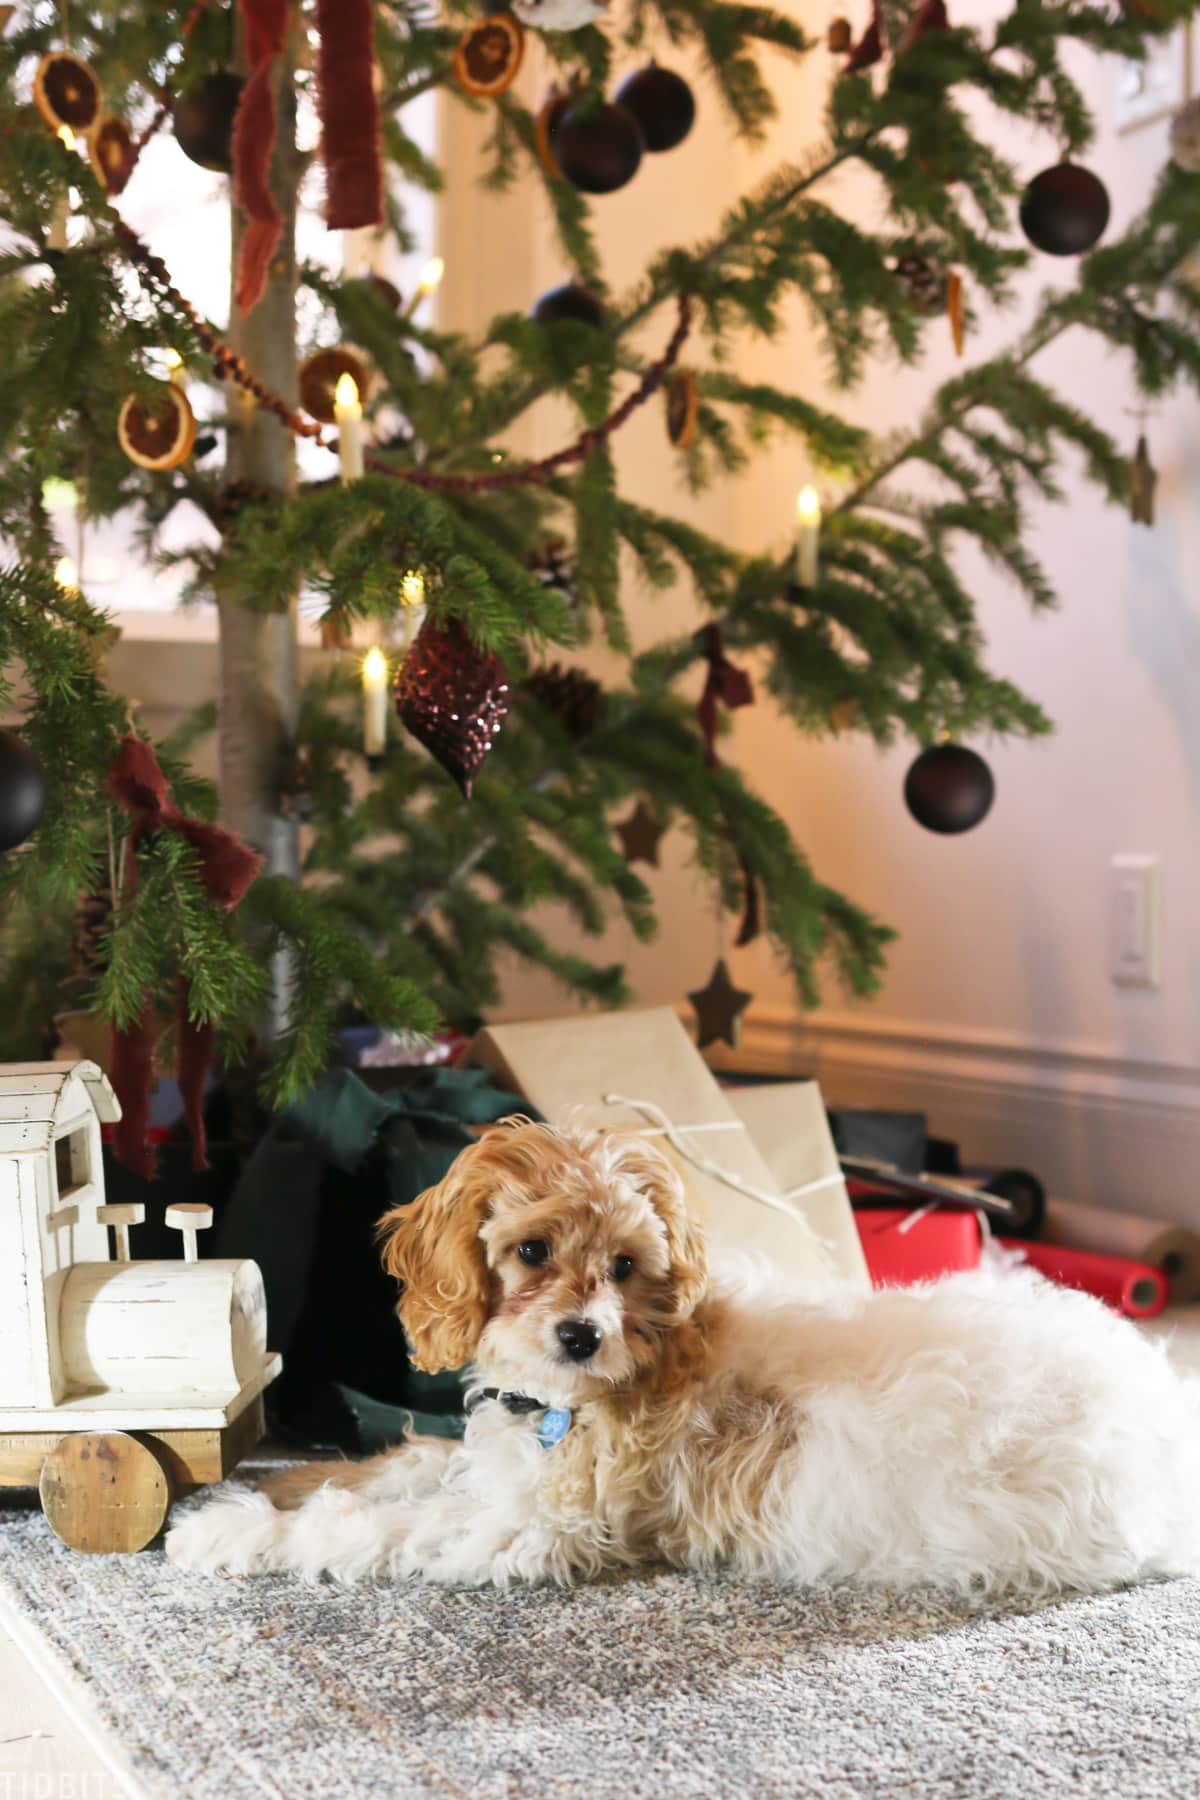 Cavapoo puppy laying down underneath the Christmas tree